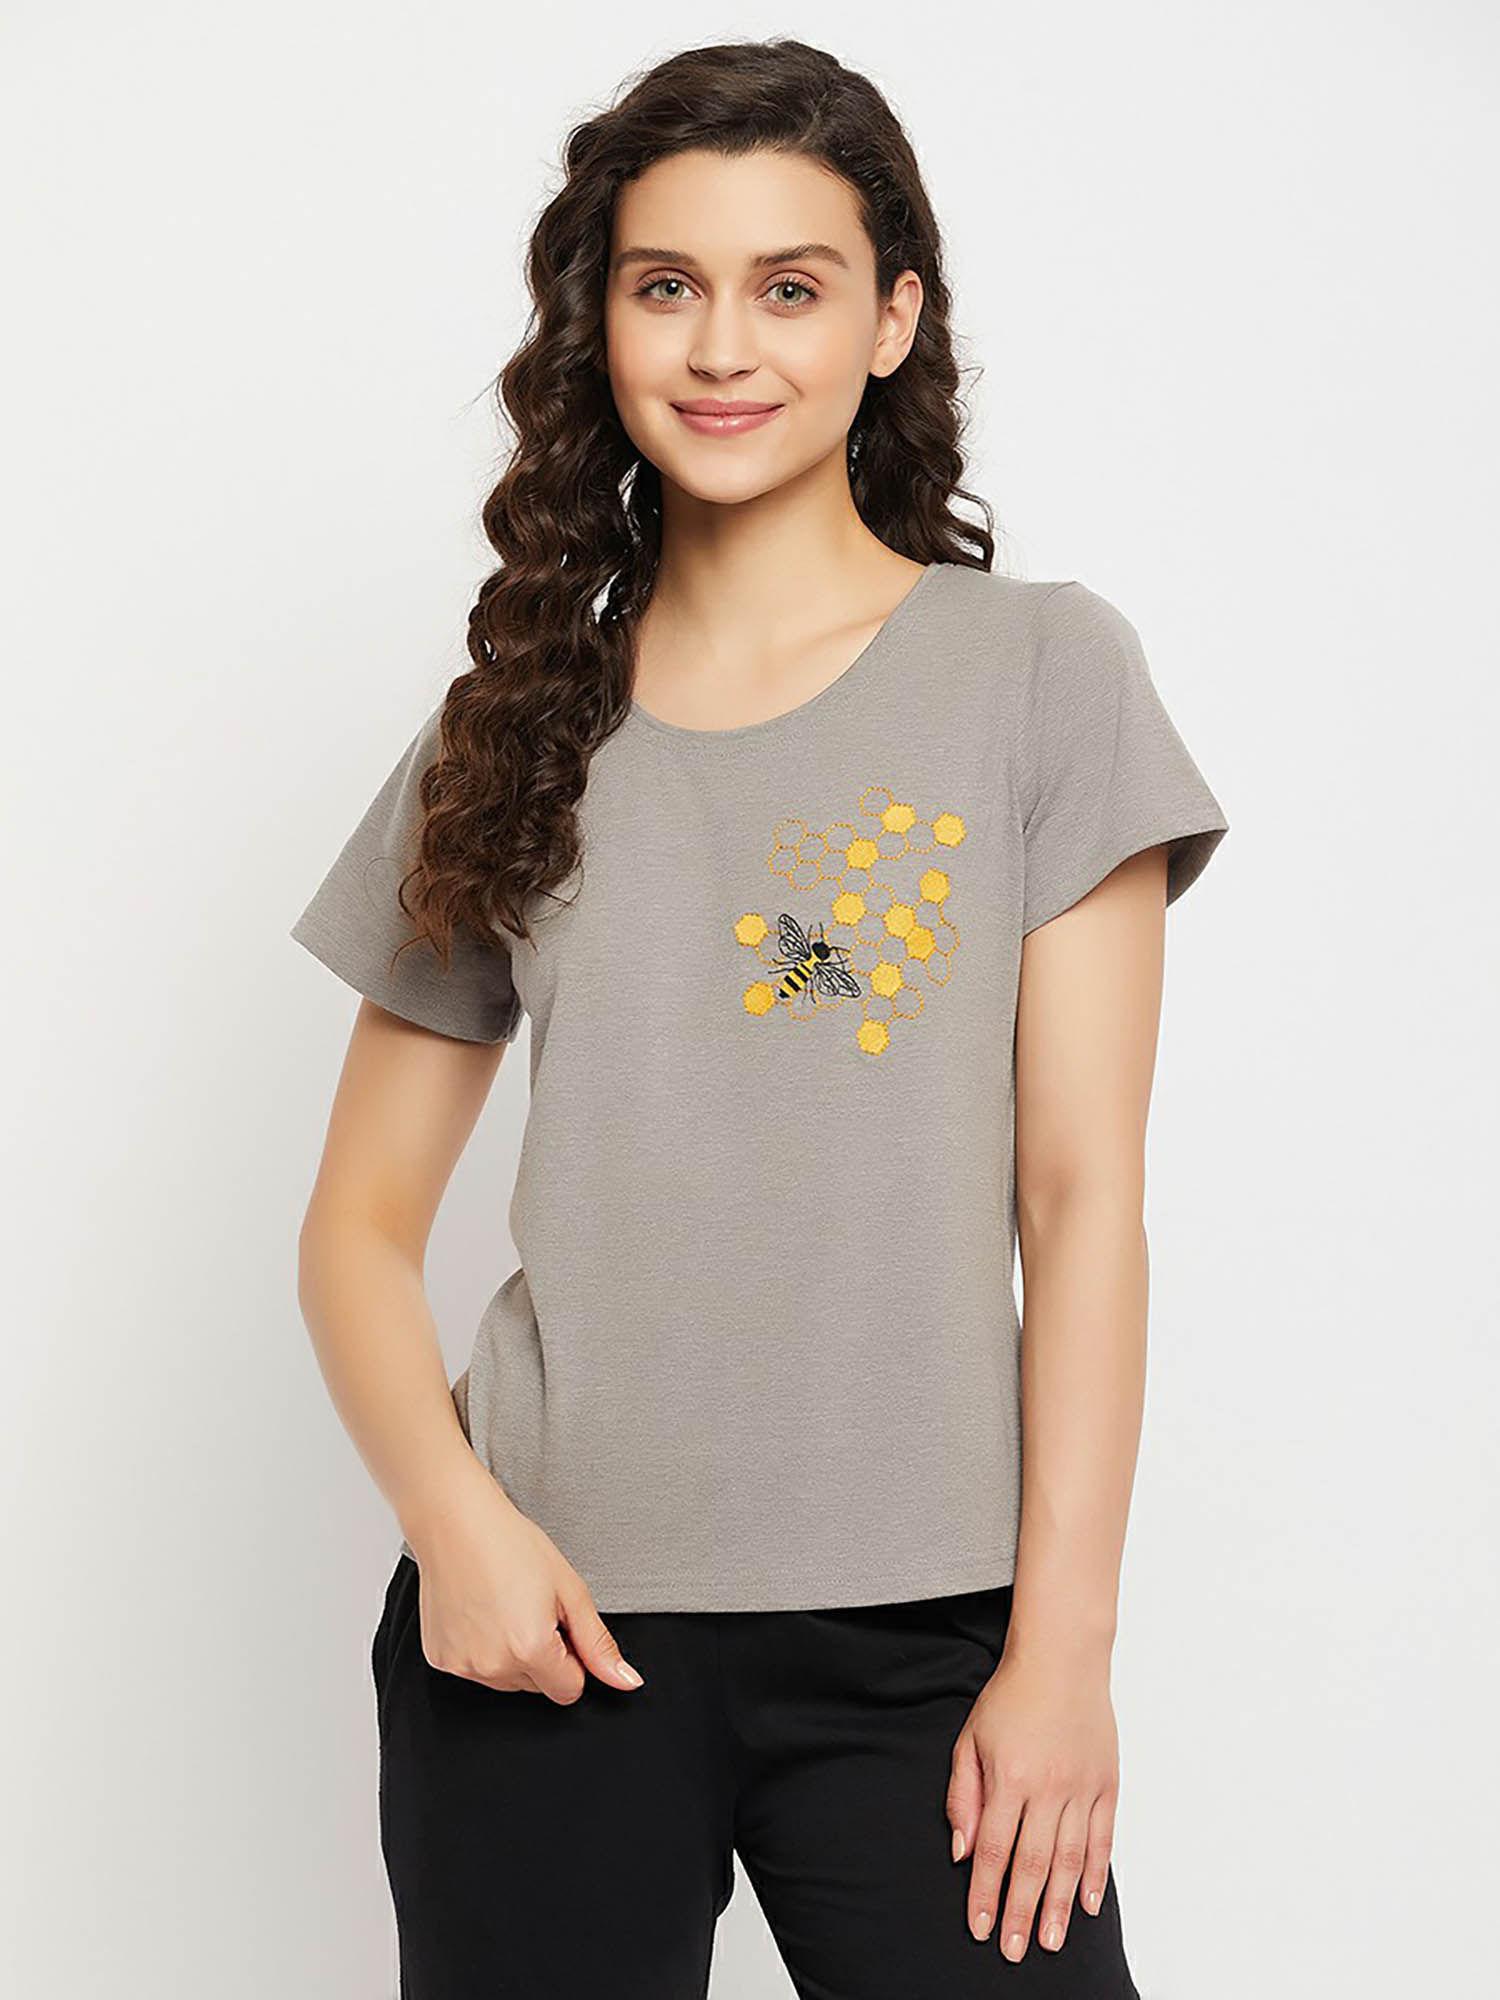 bee embroidered top in grey melange - 100 percent cotton